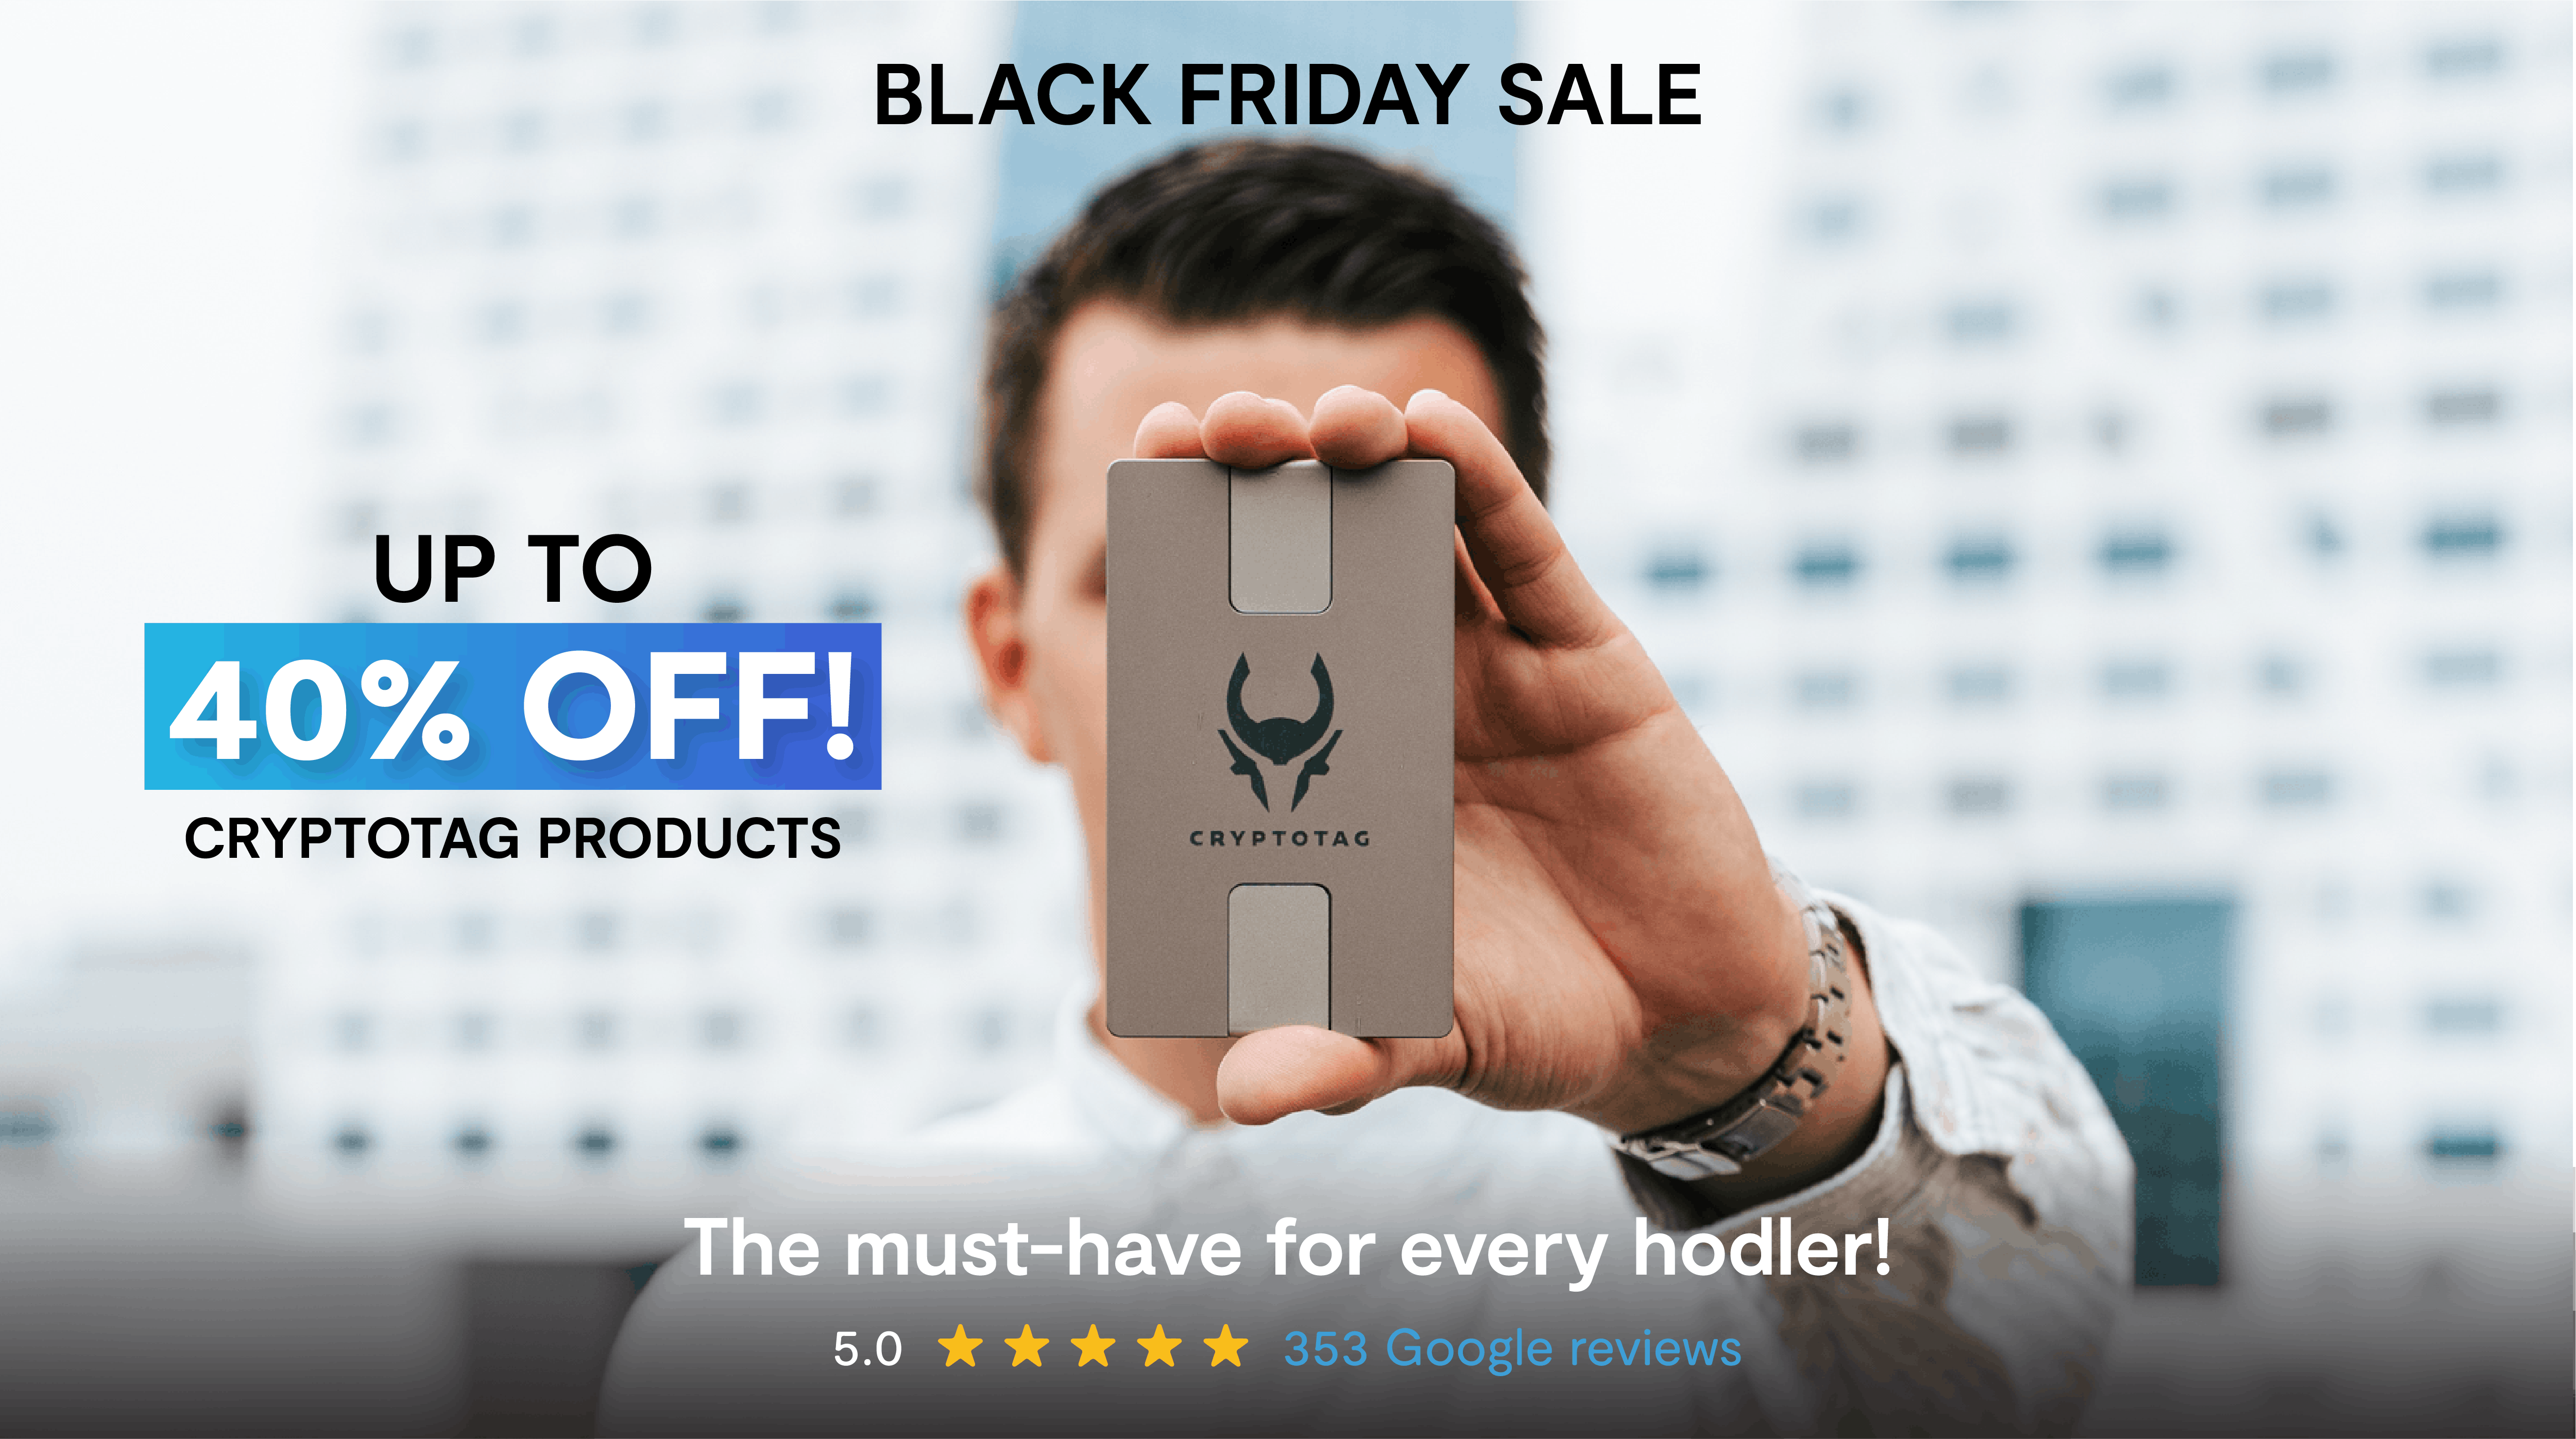 Cryptotag's Black Friday sale: up to 40% off! 